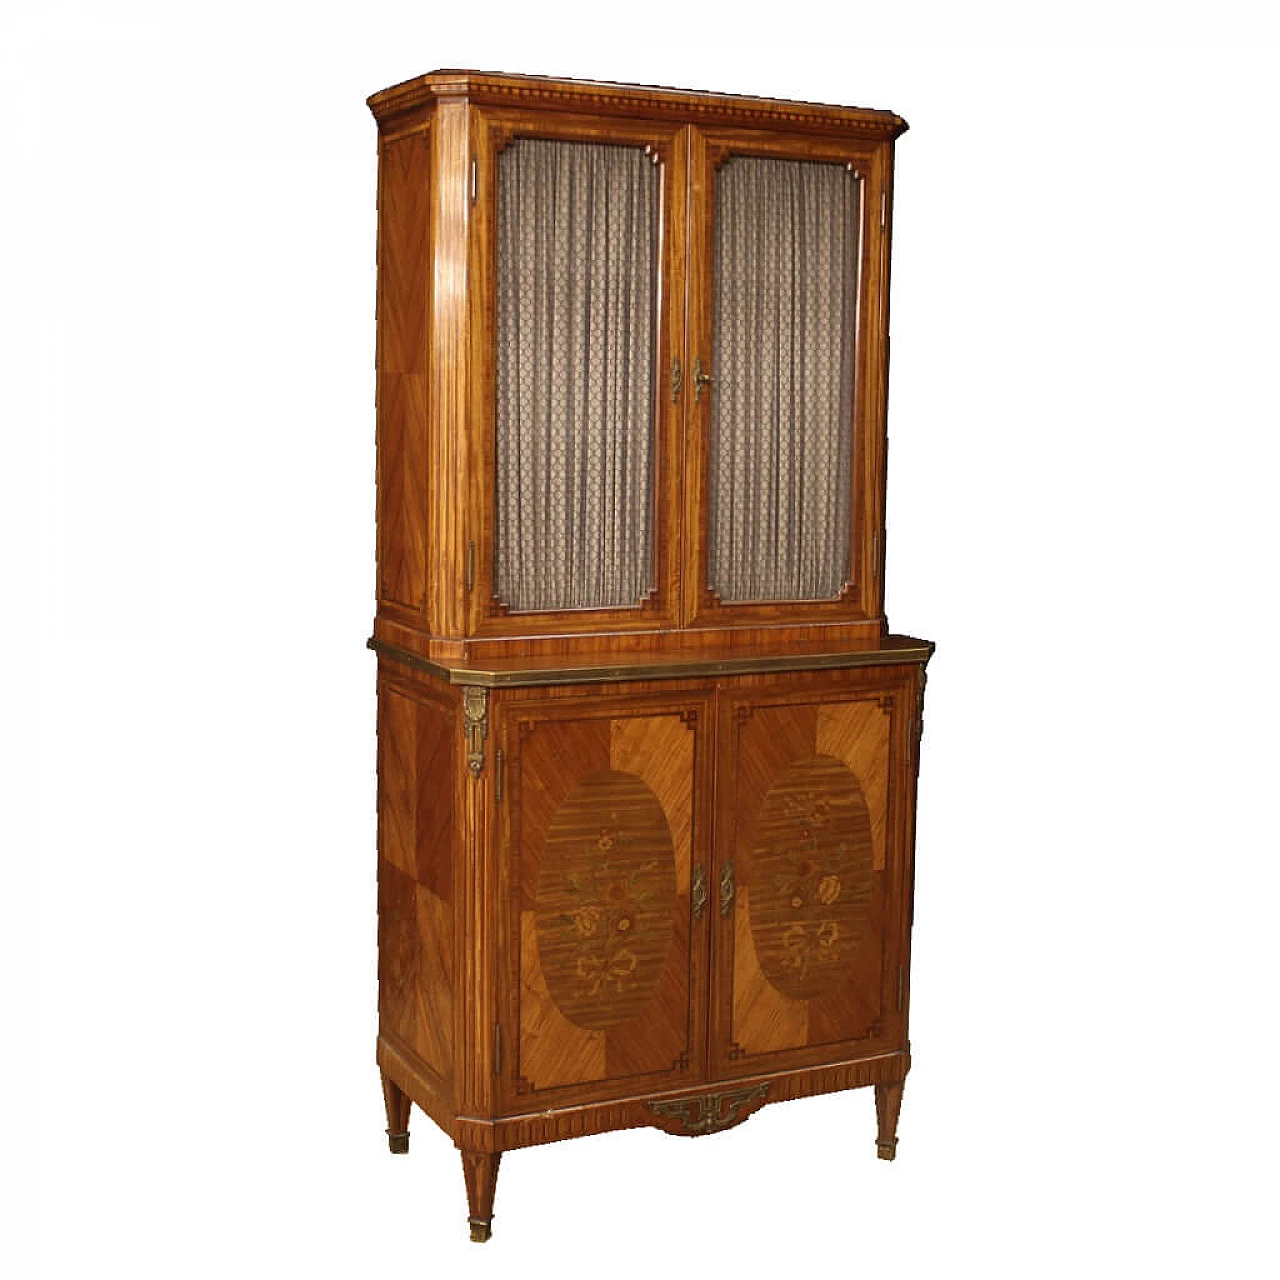 Inlaid wood double-bodied bookcase, early 20th century 1071267